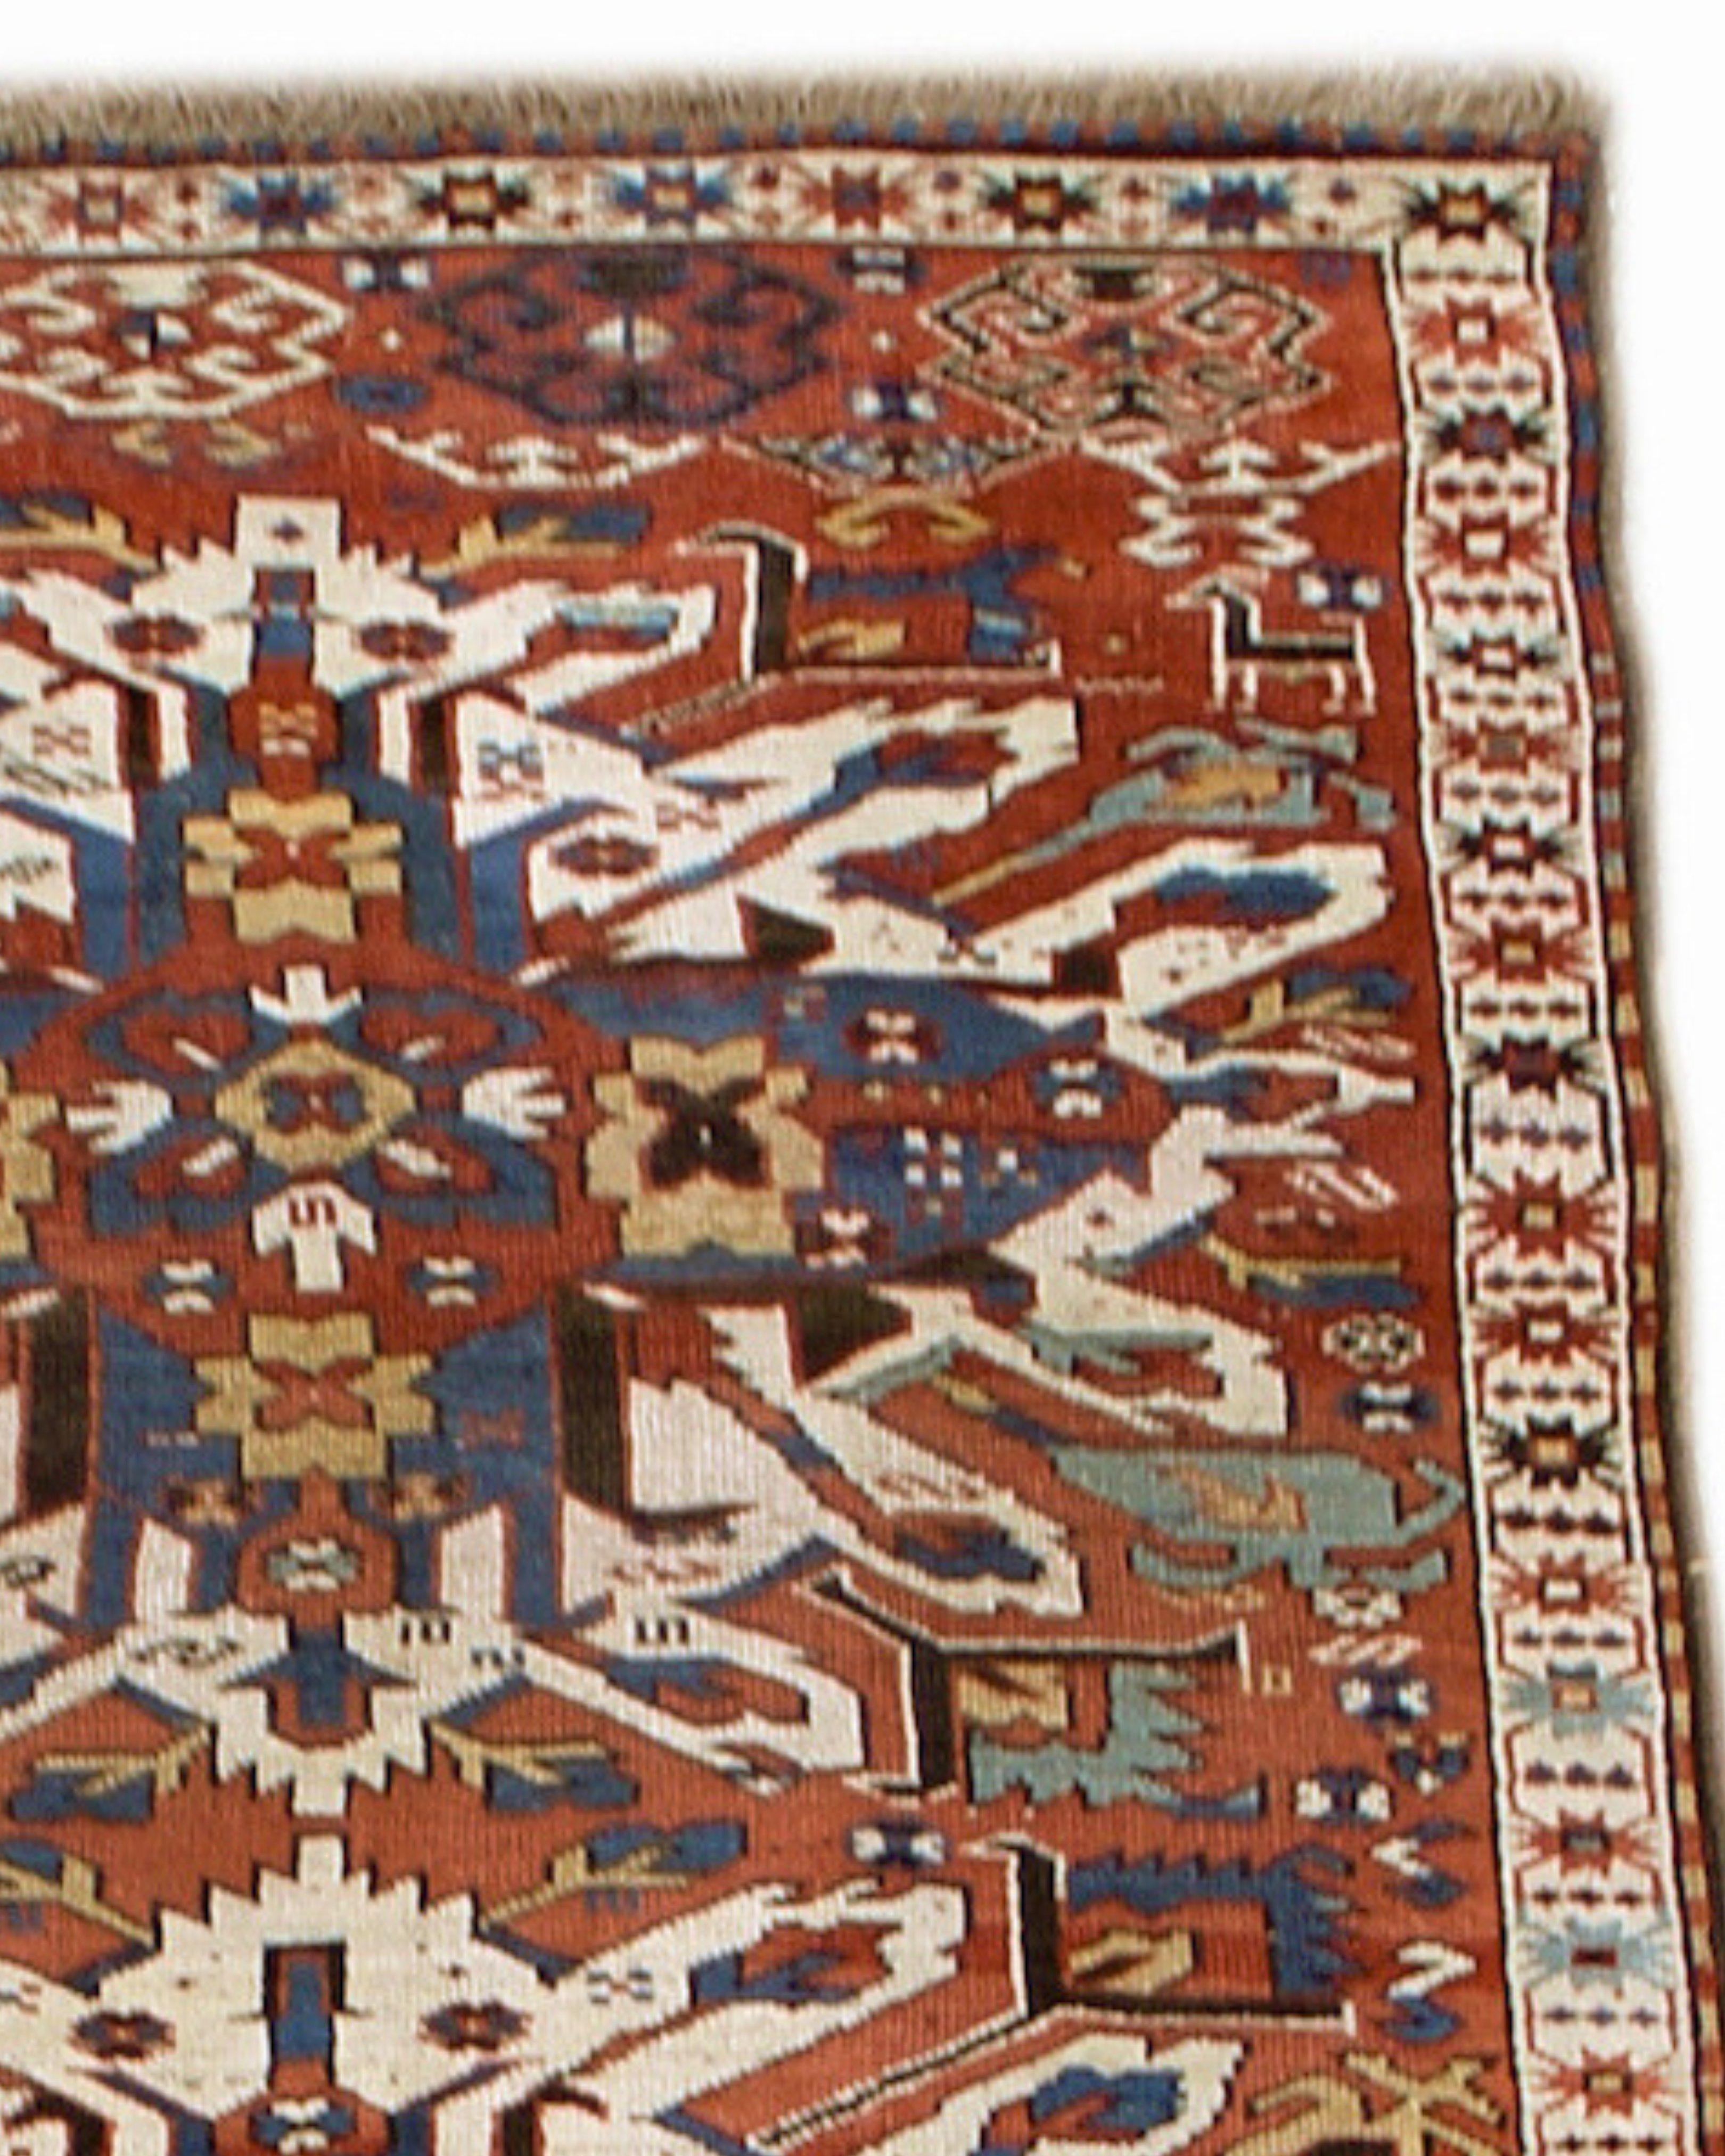 Antique Caucasian Eagle Karabagh Rug, 19th Century

A column of three ‘eagle medallions’, named for their evocation of the plumage of stretched eagle wings, are traced against the brick madder red ground in this classic Karabagh rug. Small iconic